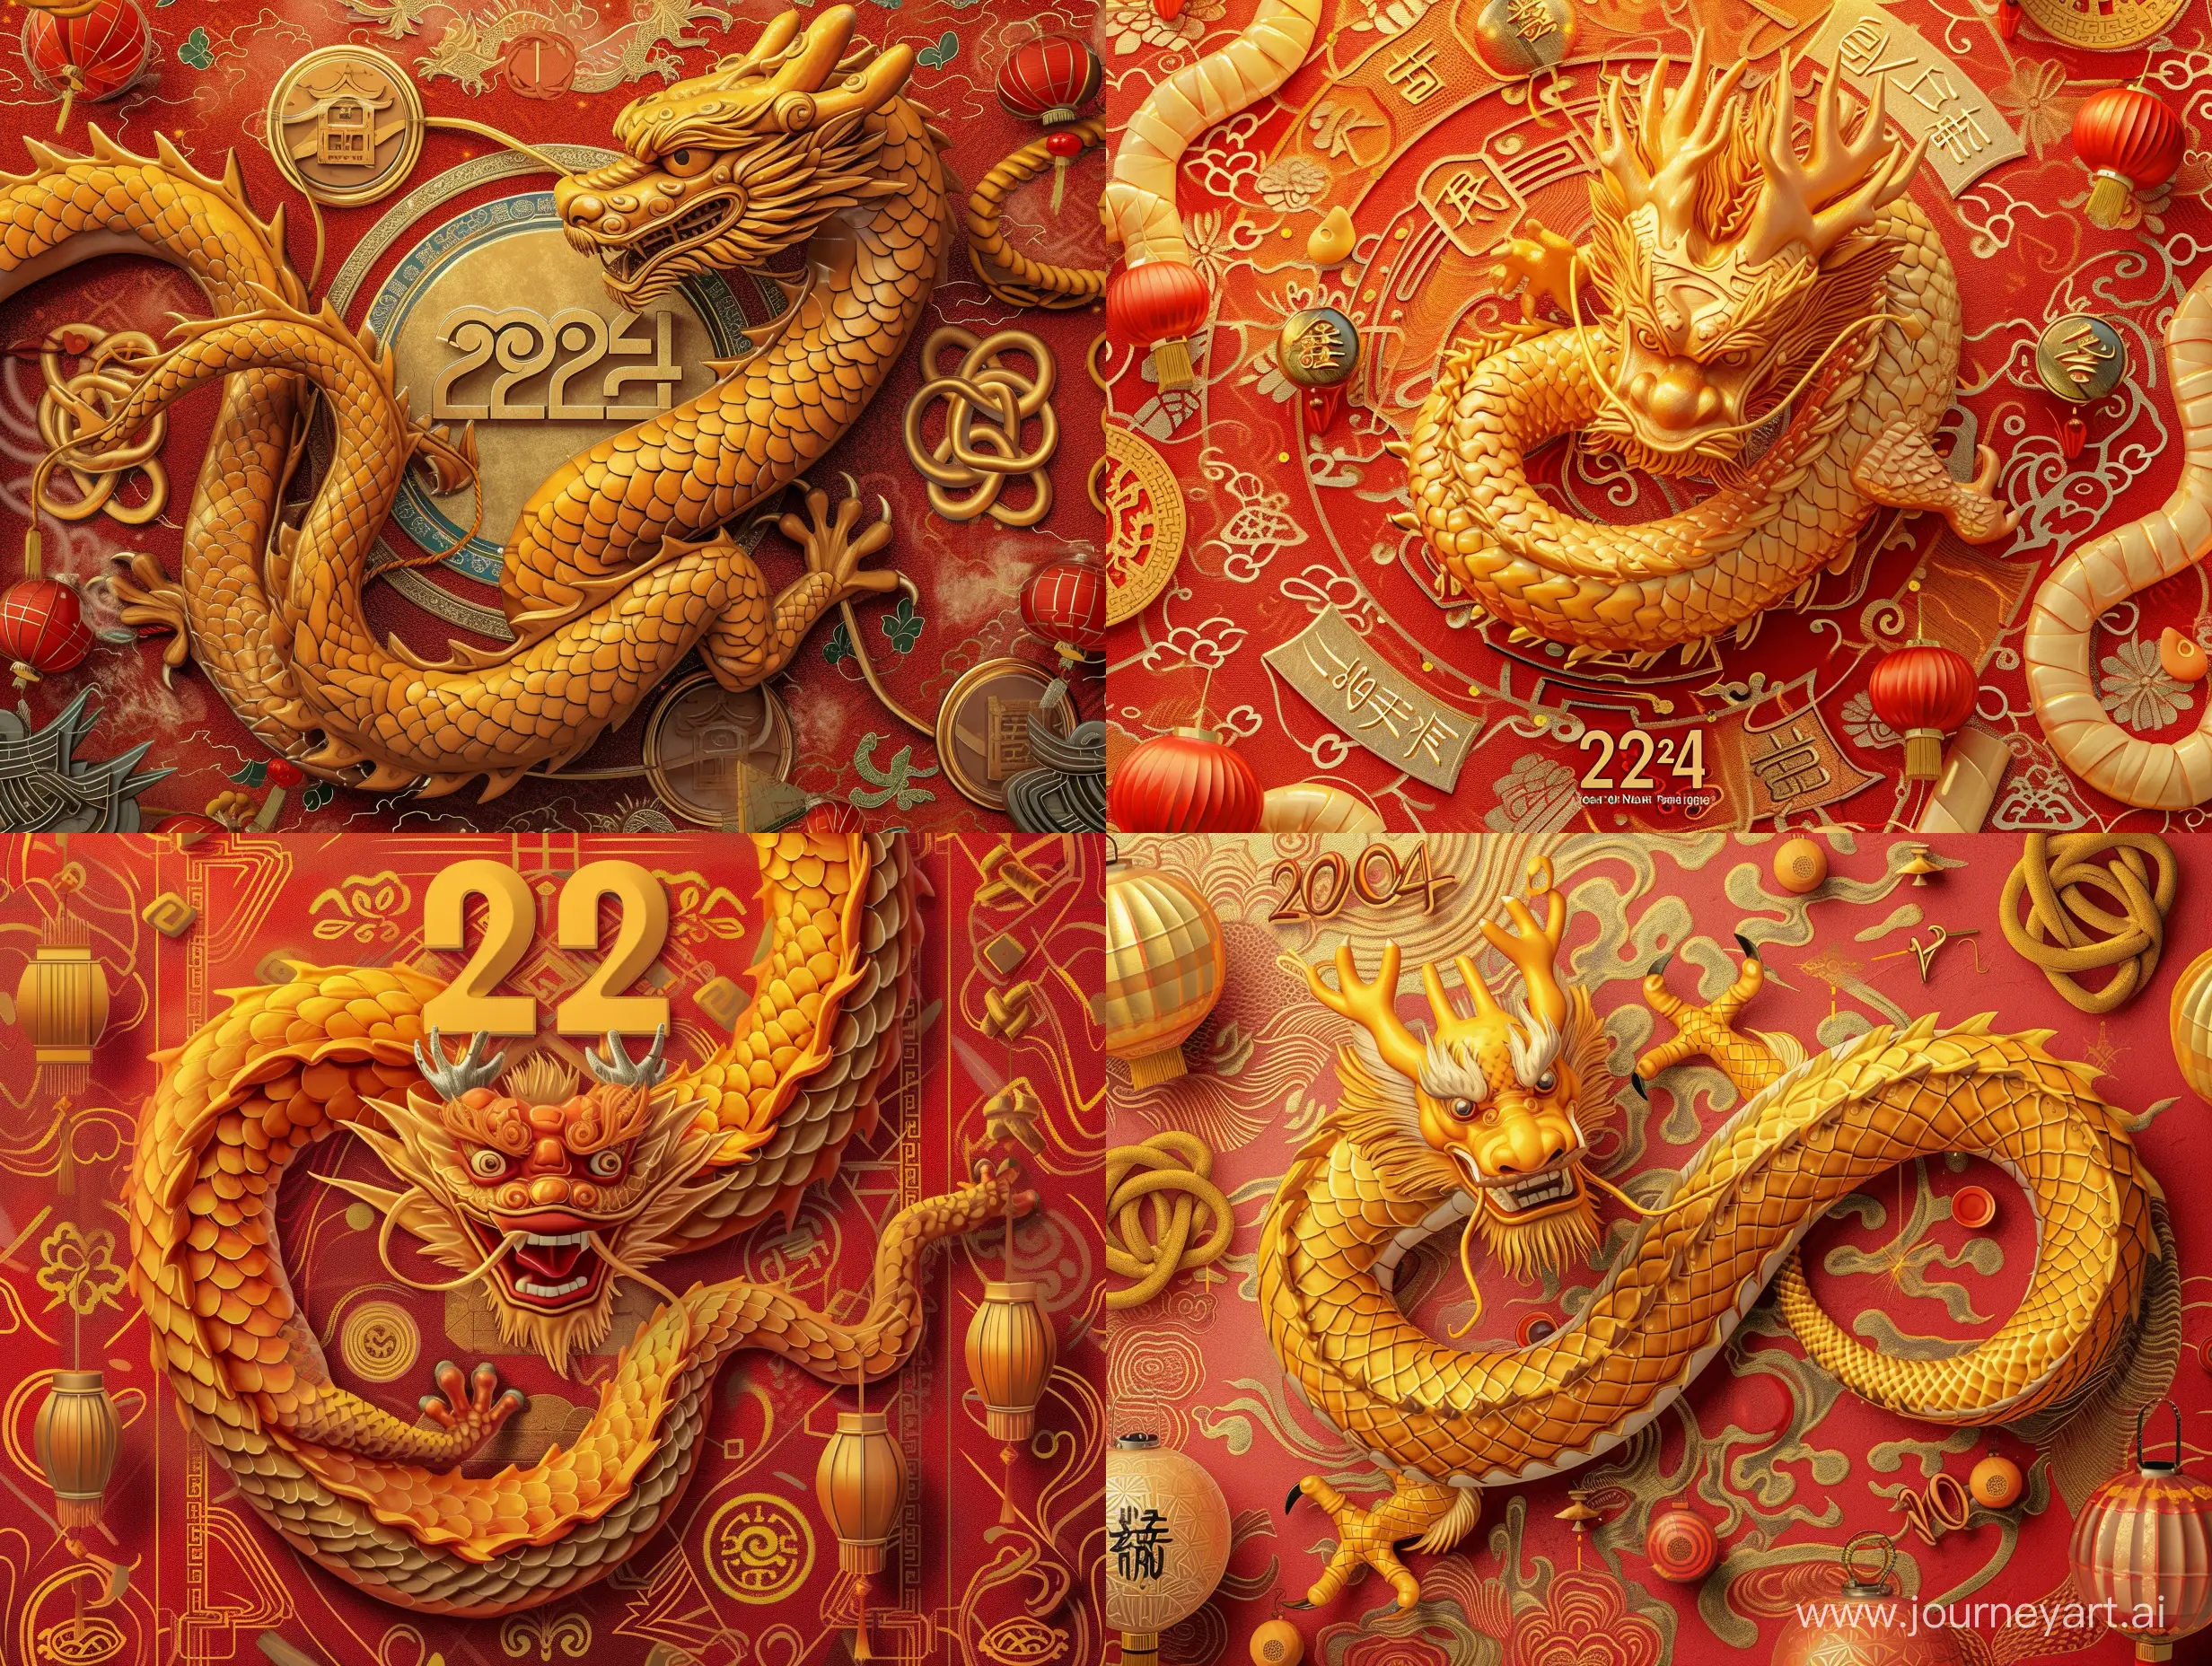 For the 2024 Chinese Year of the Dragon wallpaper, I'd blend traditional and modern elements. A vibrant background in Chinese red or gold with traditional patterns sets the scene. A lifelike dragon in the center symbolizes the year, while "2024" in traditional calligraphy adds context. Surrounding the dragon with festive Chinese New Year decorations like lanterns and knots completes the celebratory vibe. The design, tailored for smartphone screens, aims for visual harmony and conveys prosperity and joy for the year ahead.